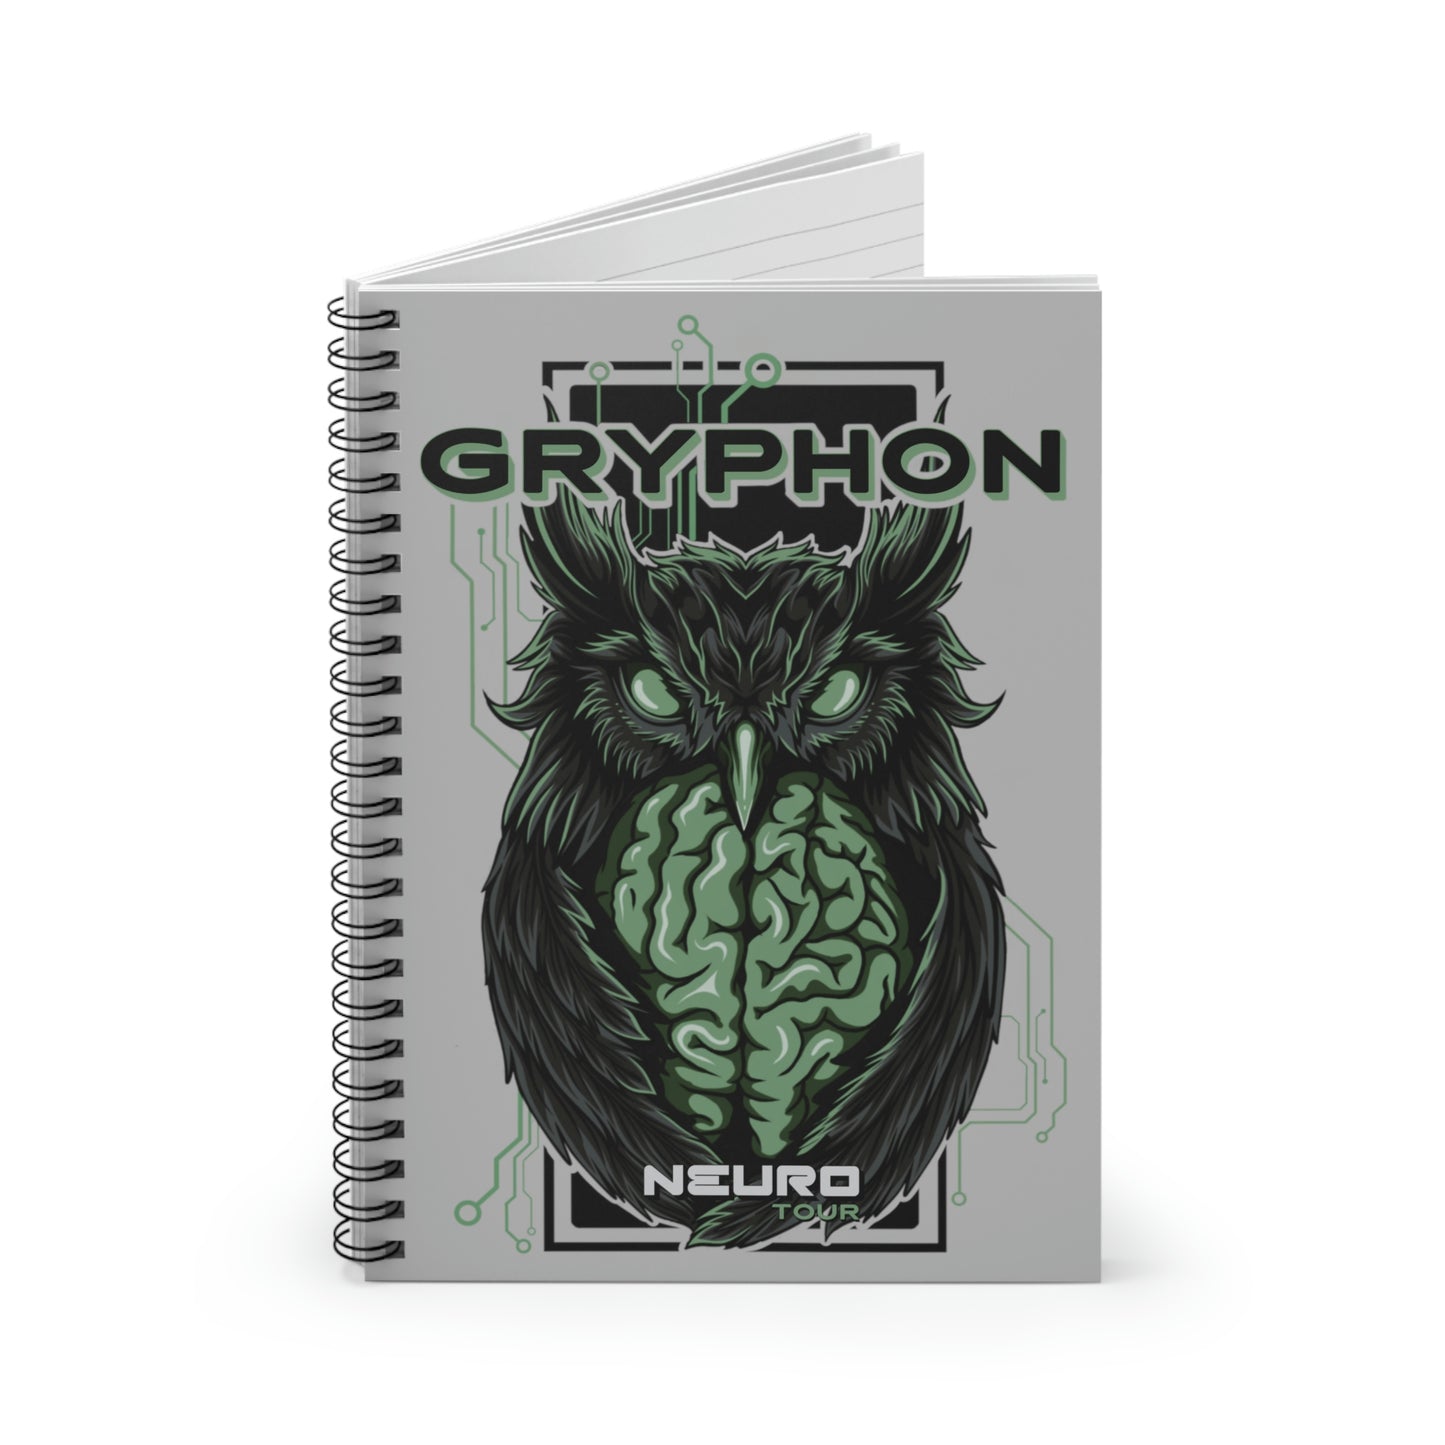 Gryphon Notebook | The Bonds That Tie